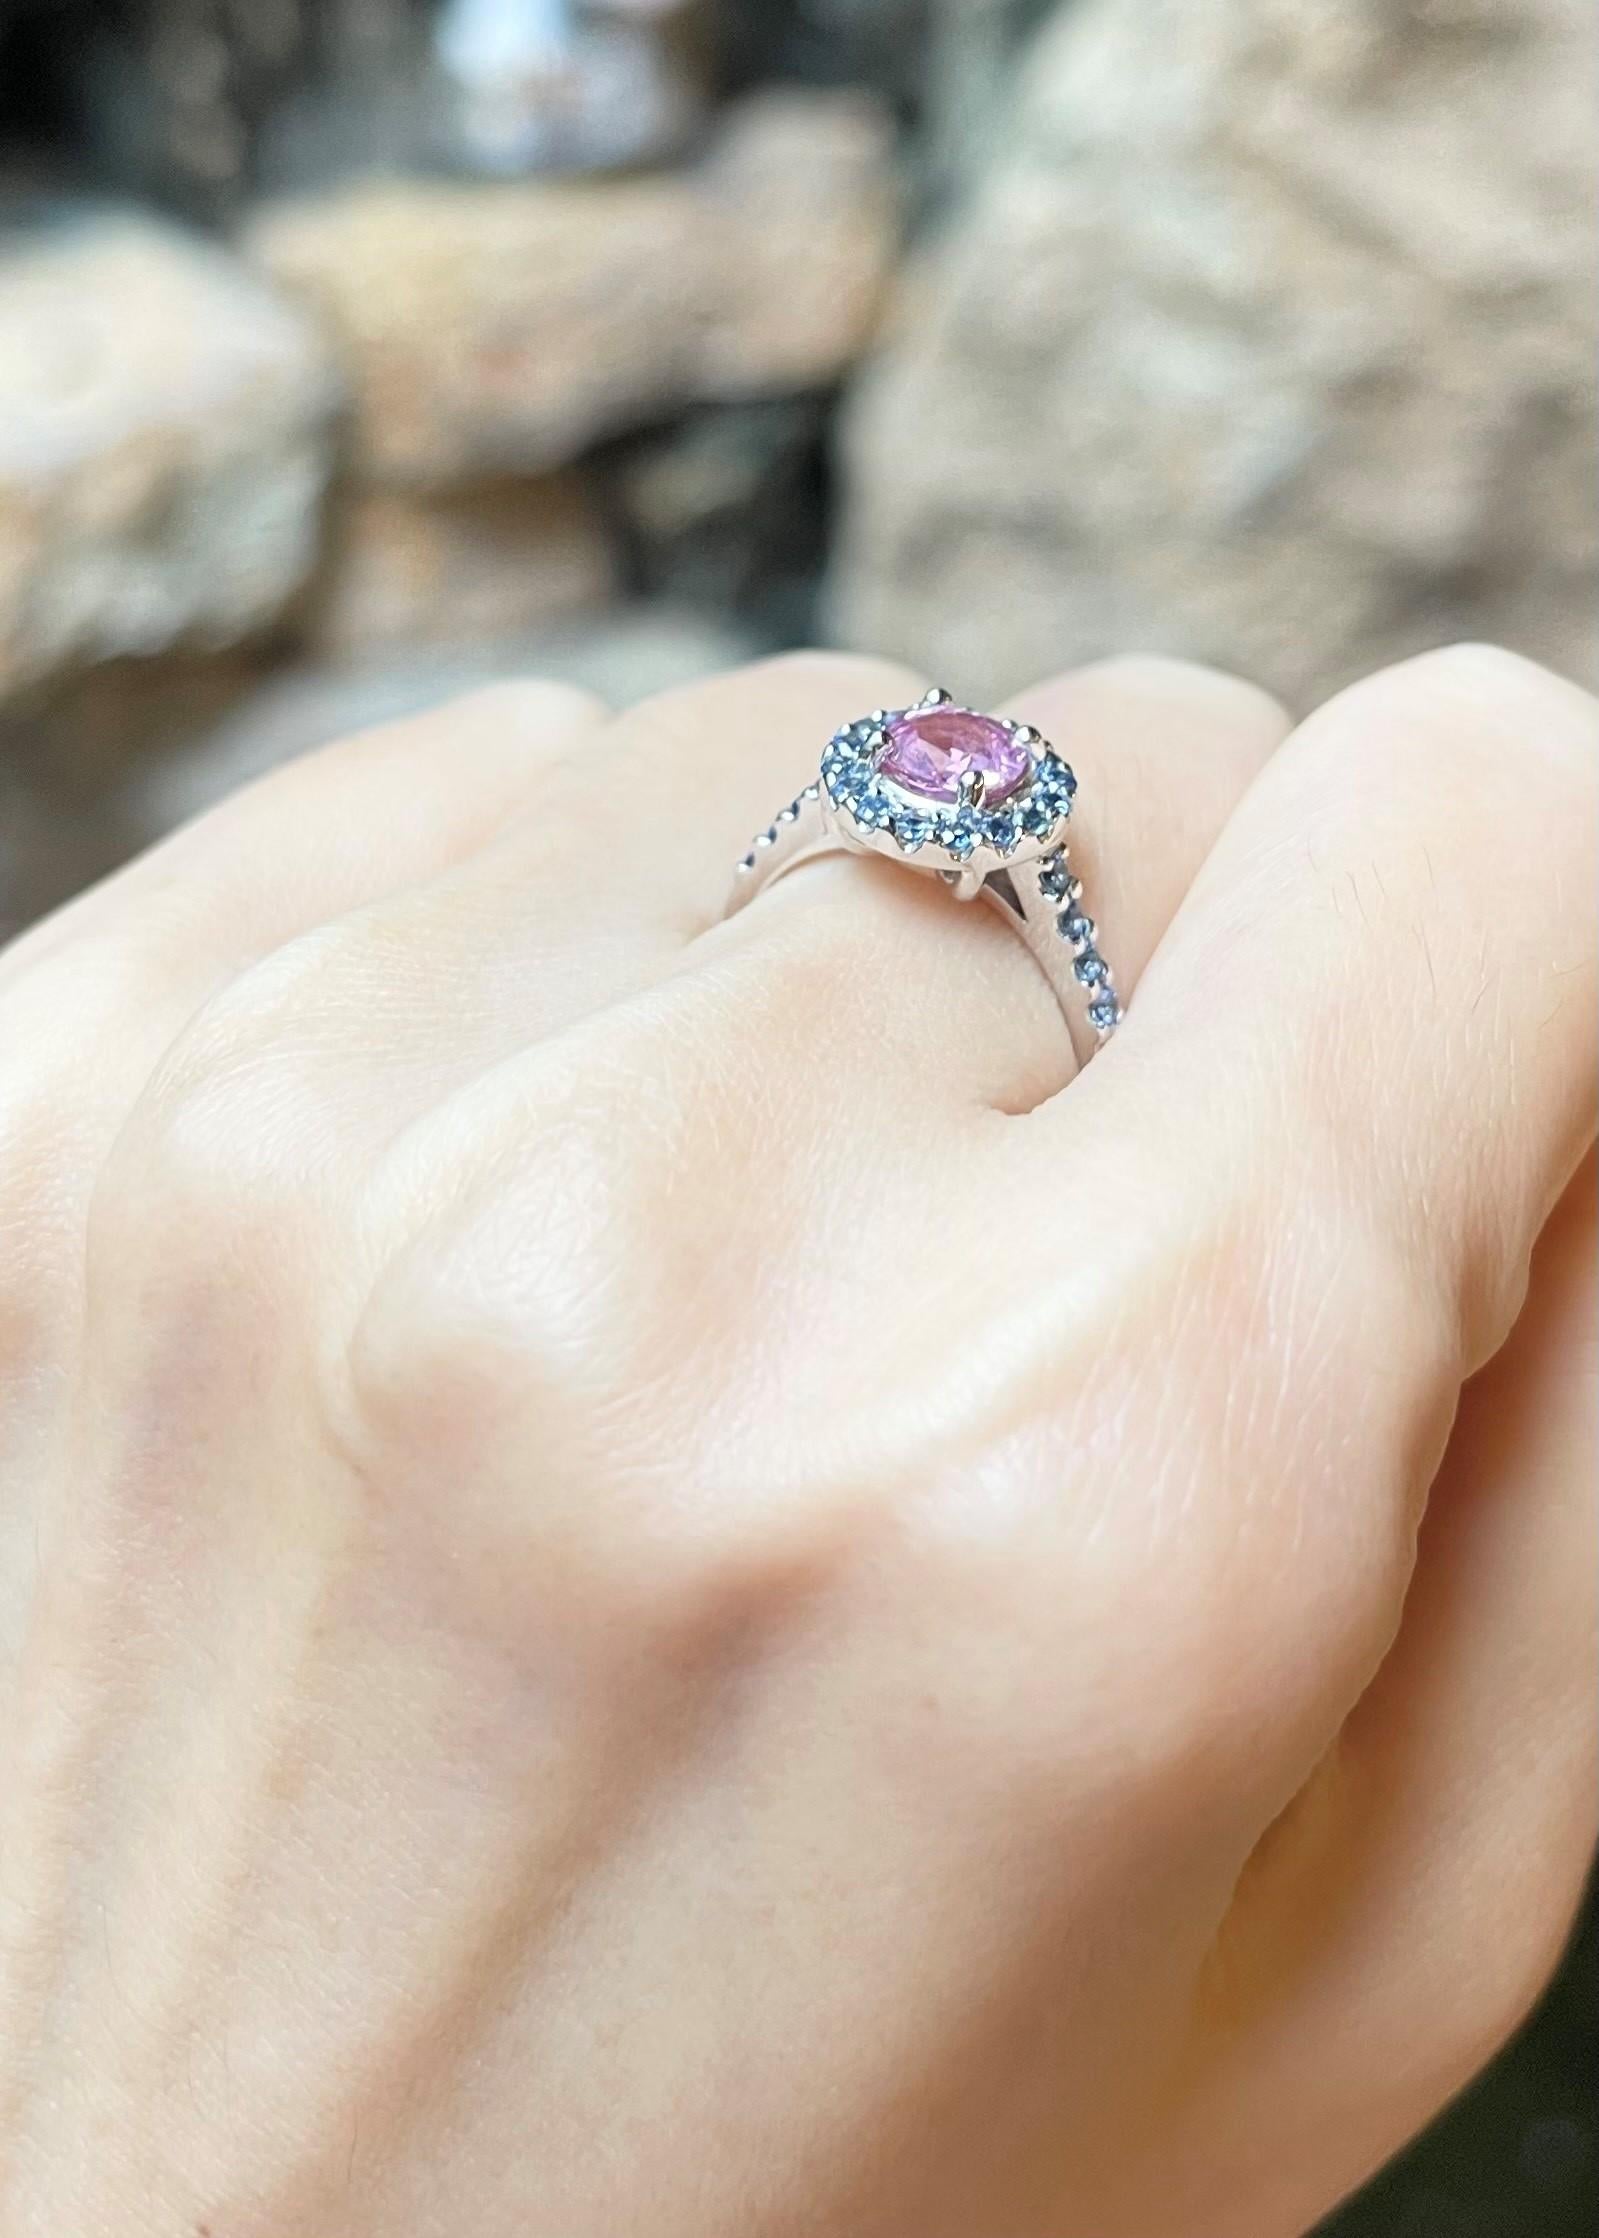 Pink Sapphire 1.09 carats and Blue Sapphire 0.61 carats Ring set in 18K White Gold Settings 

Width:  1.1 cm 
Length: 1.1 cm
Ring Size: 52
Total Weight: 4.86 grams

